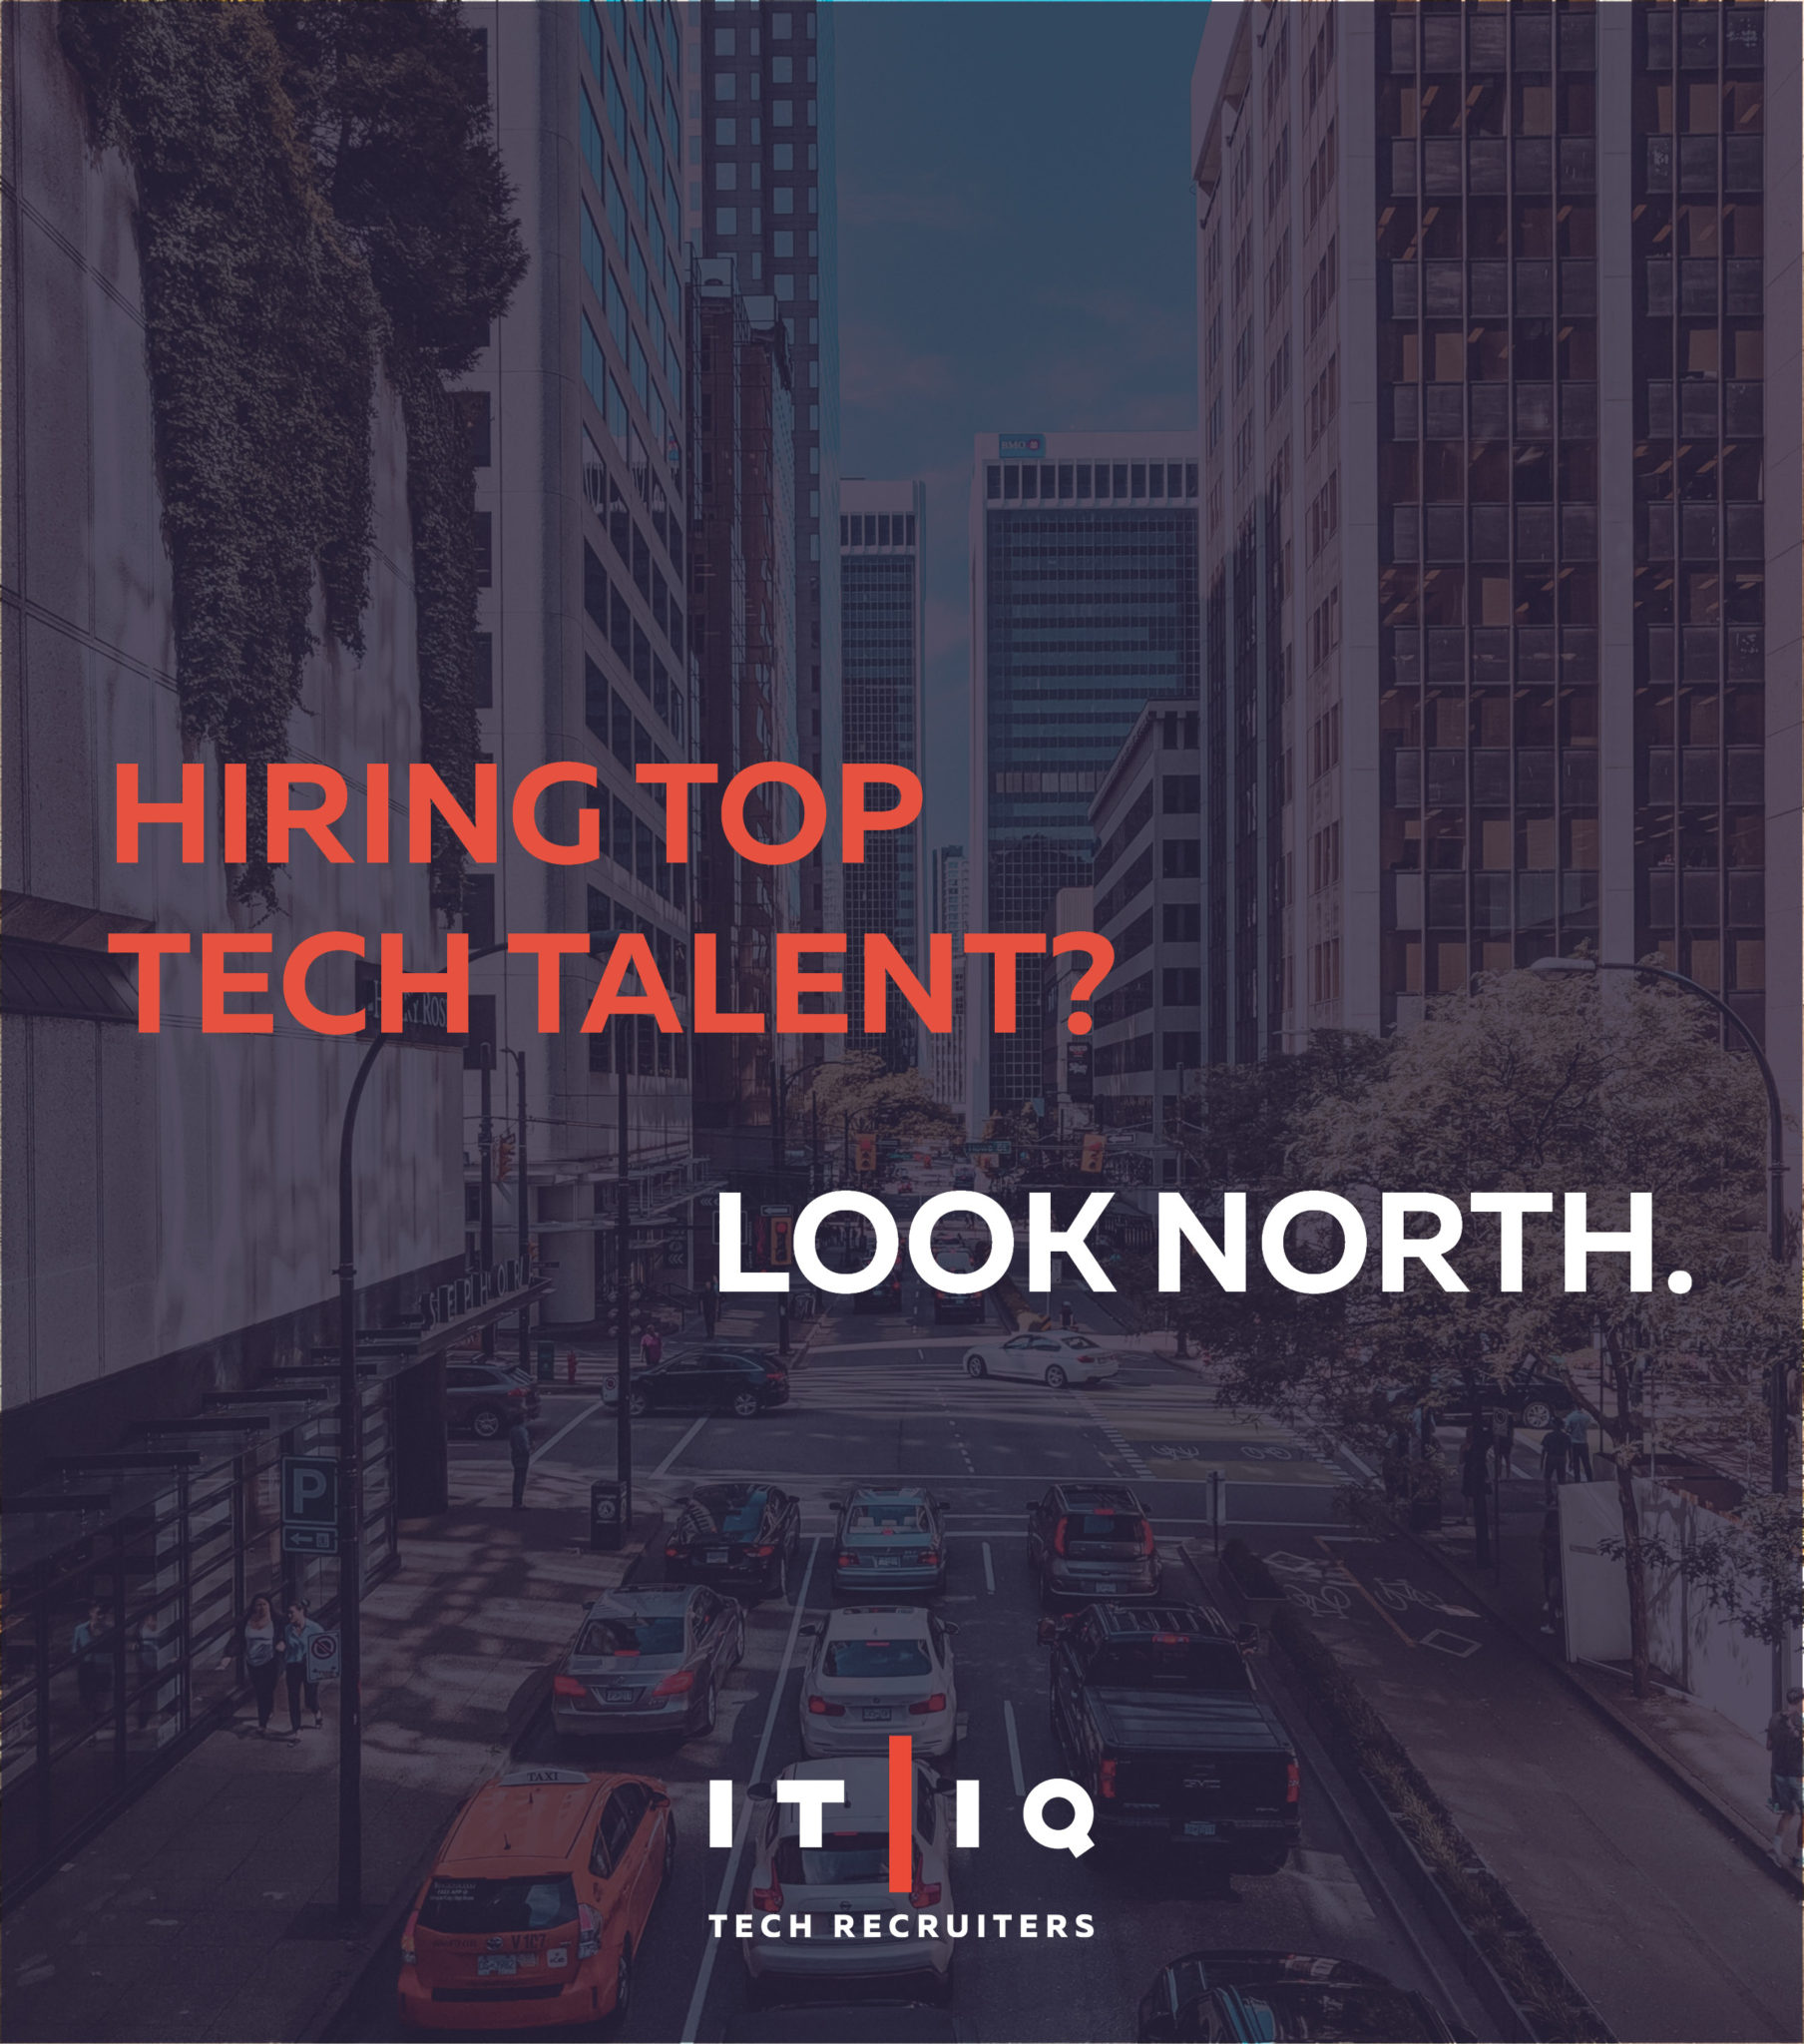 IT/IQ Tech Recruiters "Hiring Top Tech Talent? Look North" Graphic, Background image features Canadian city street